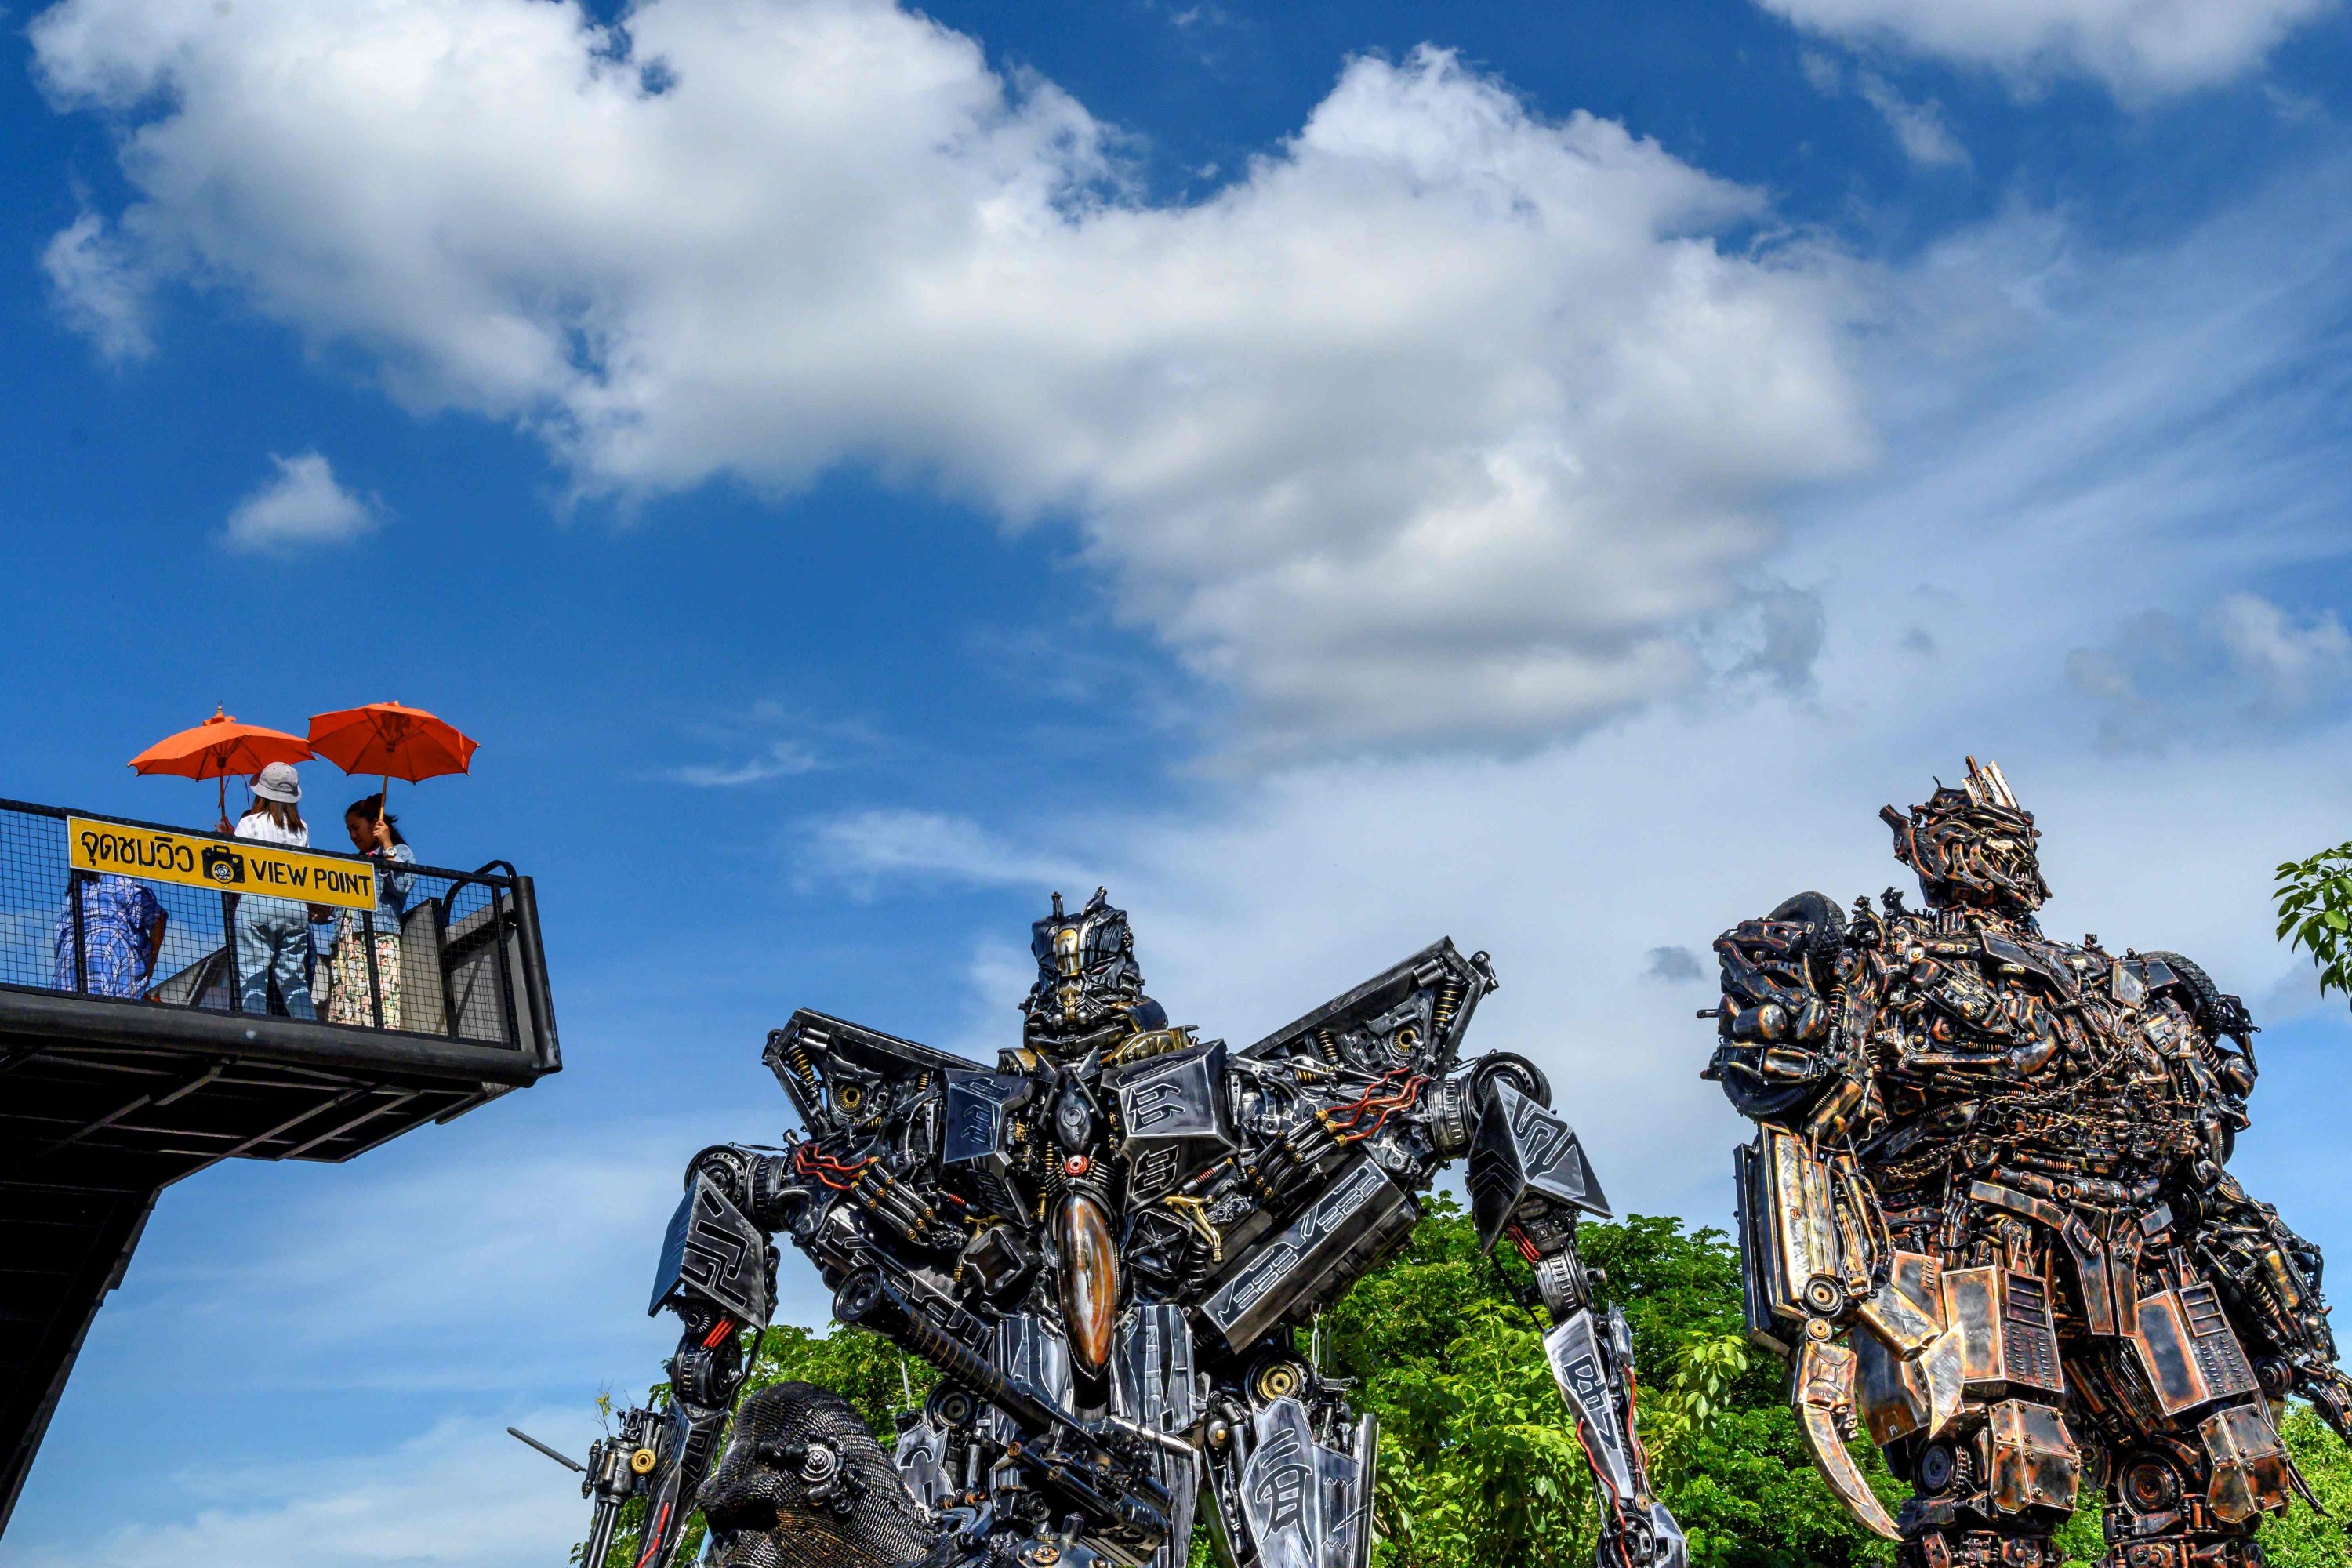 Tourists take photos of life-sized sculptures of characters from the "Transformers" film franchise made of scrap metal parts at the Ban Hun Lek museum in Ang Thong, Thailand, July 18, 2020. (AFP PHOTO)